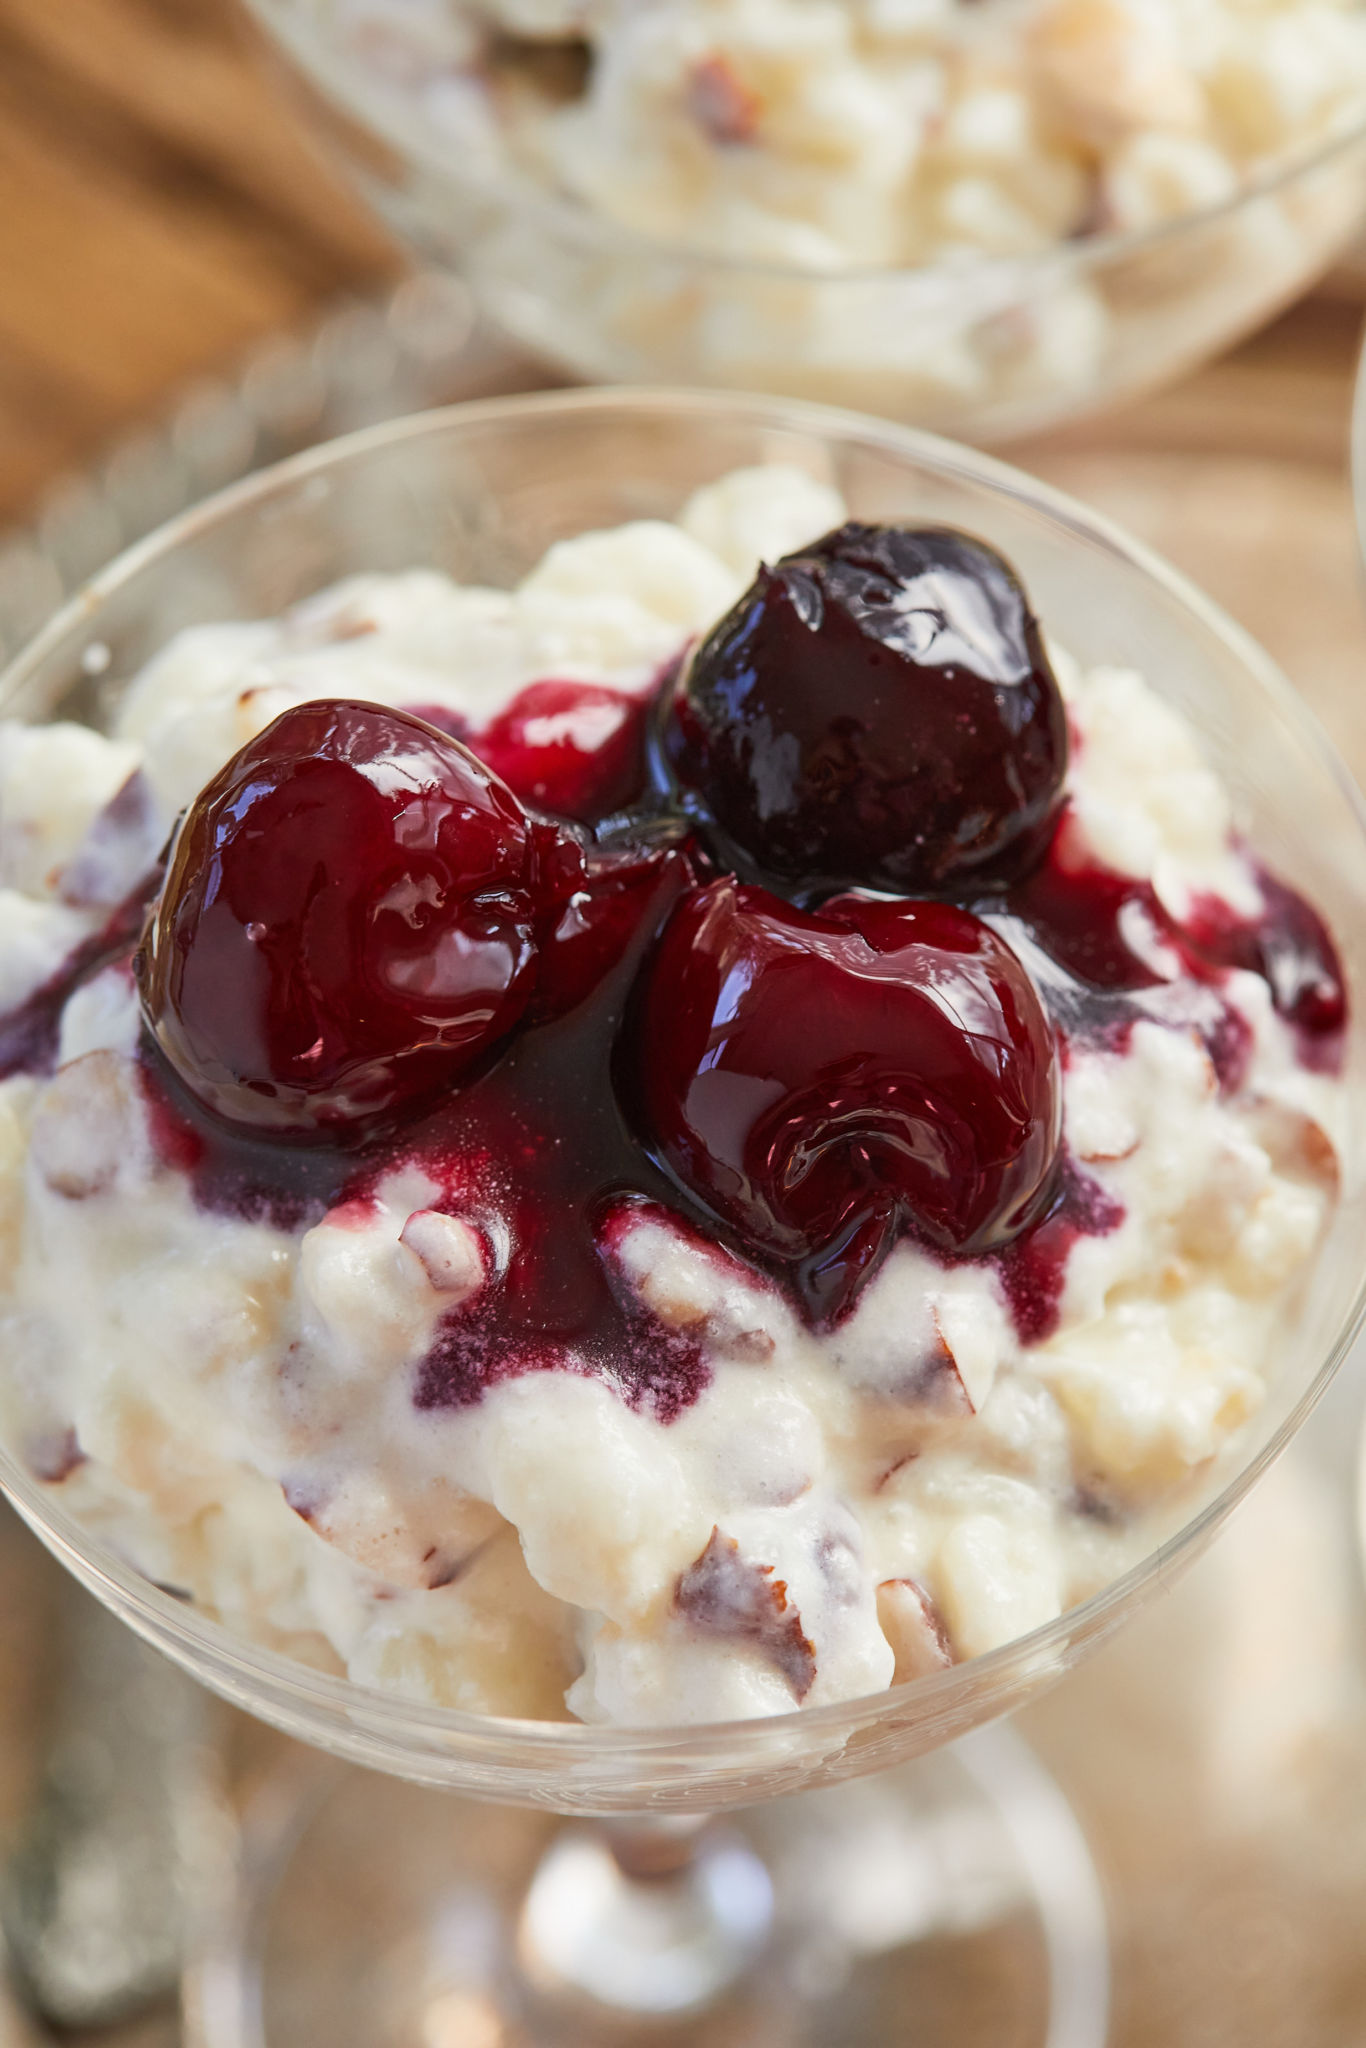 A close up of the cherries and rice pudding to show texture.